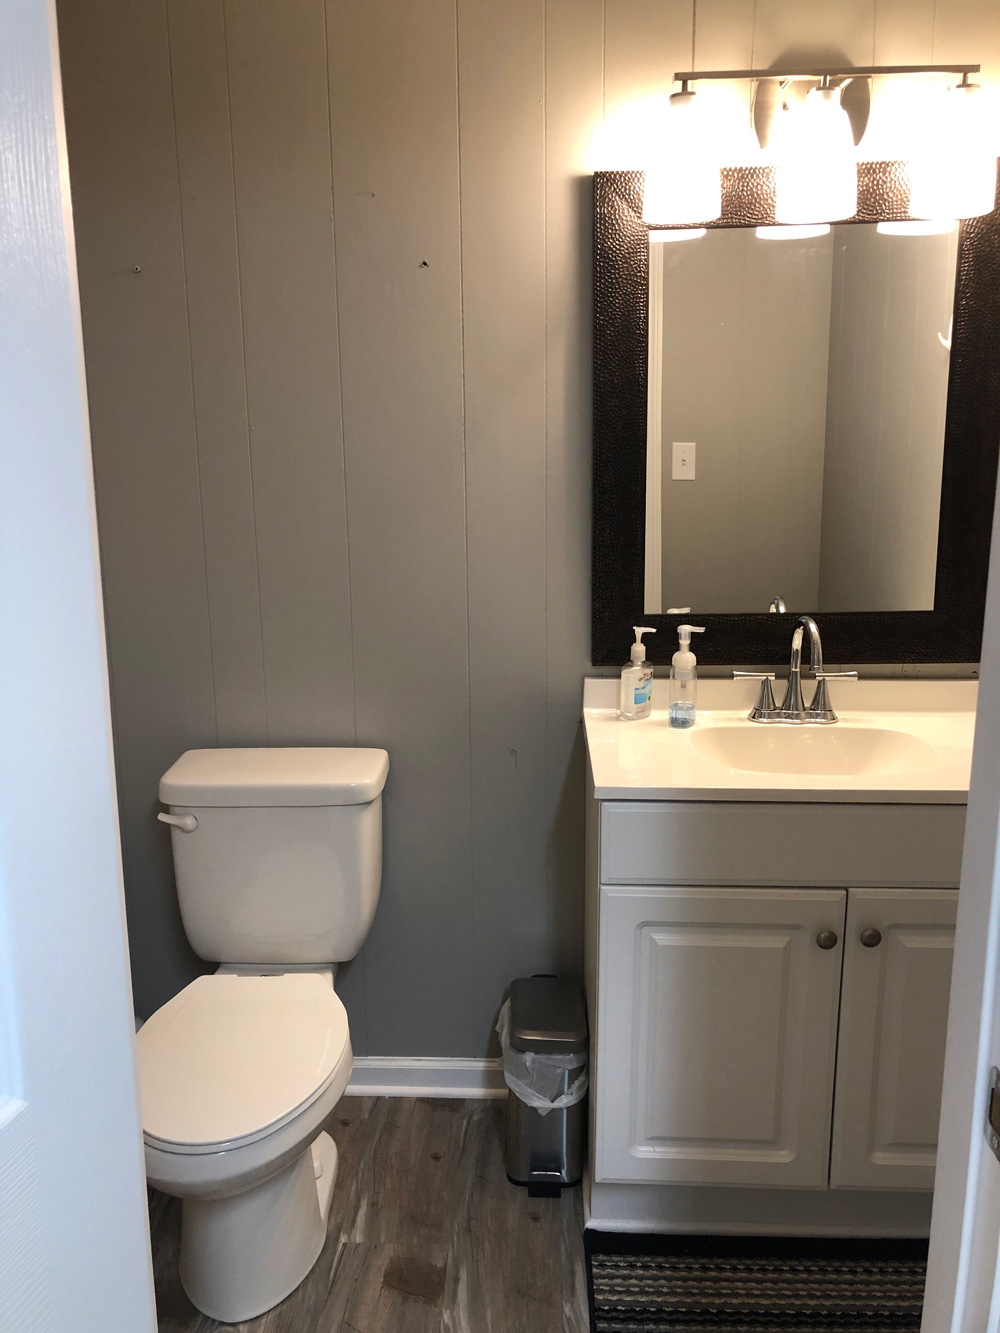 Bathroom featuring toilet and sink before renovation.